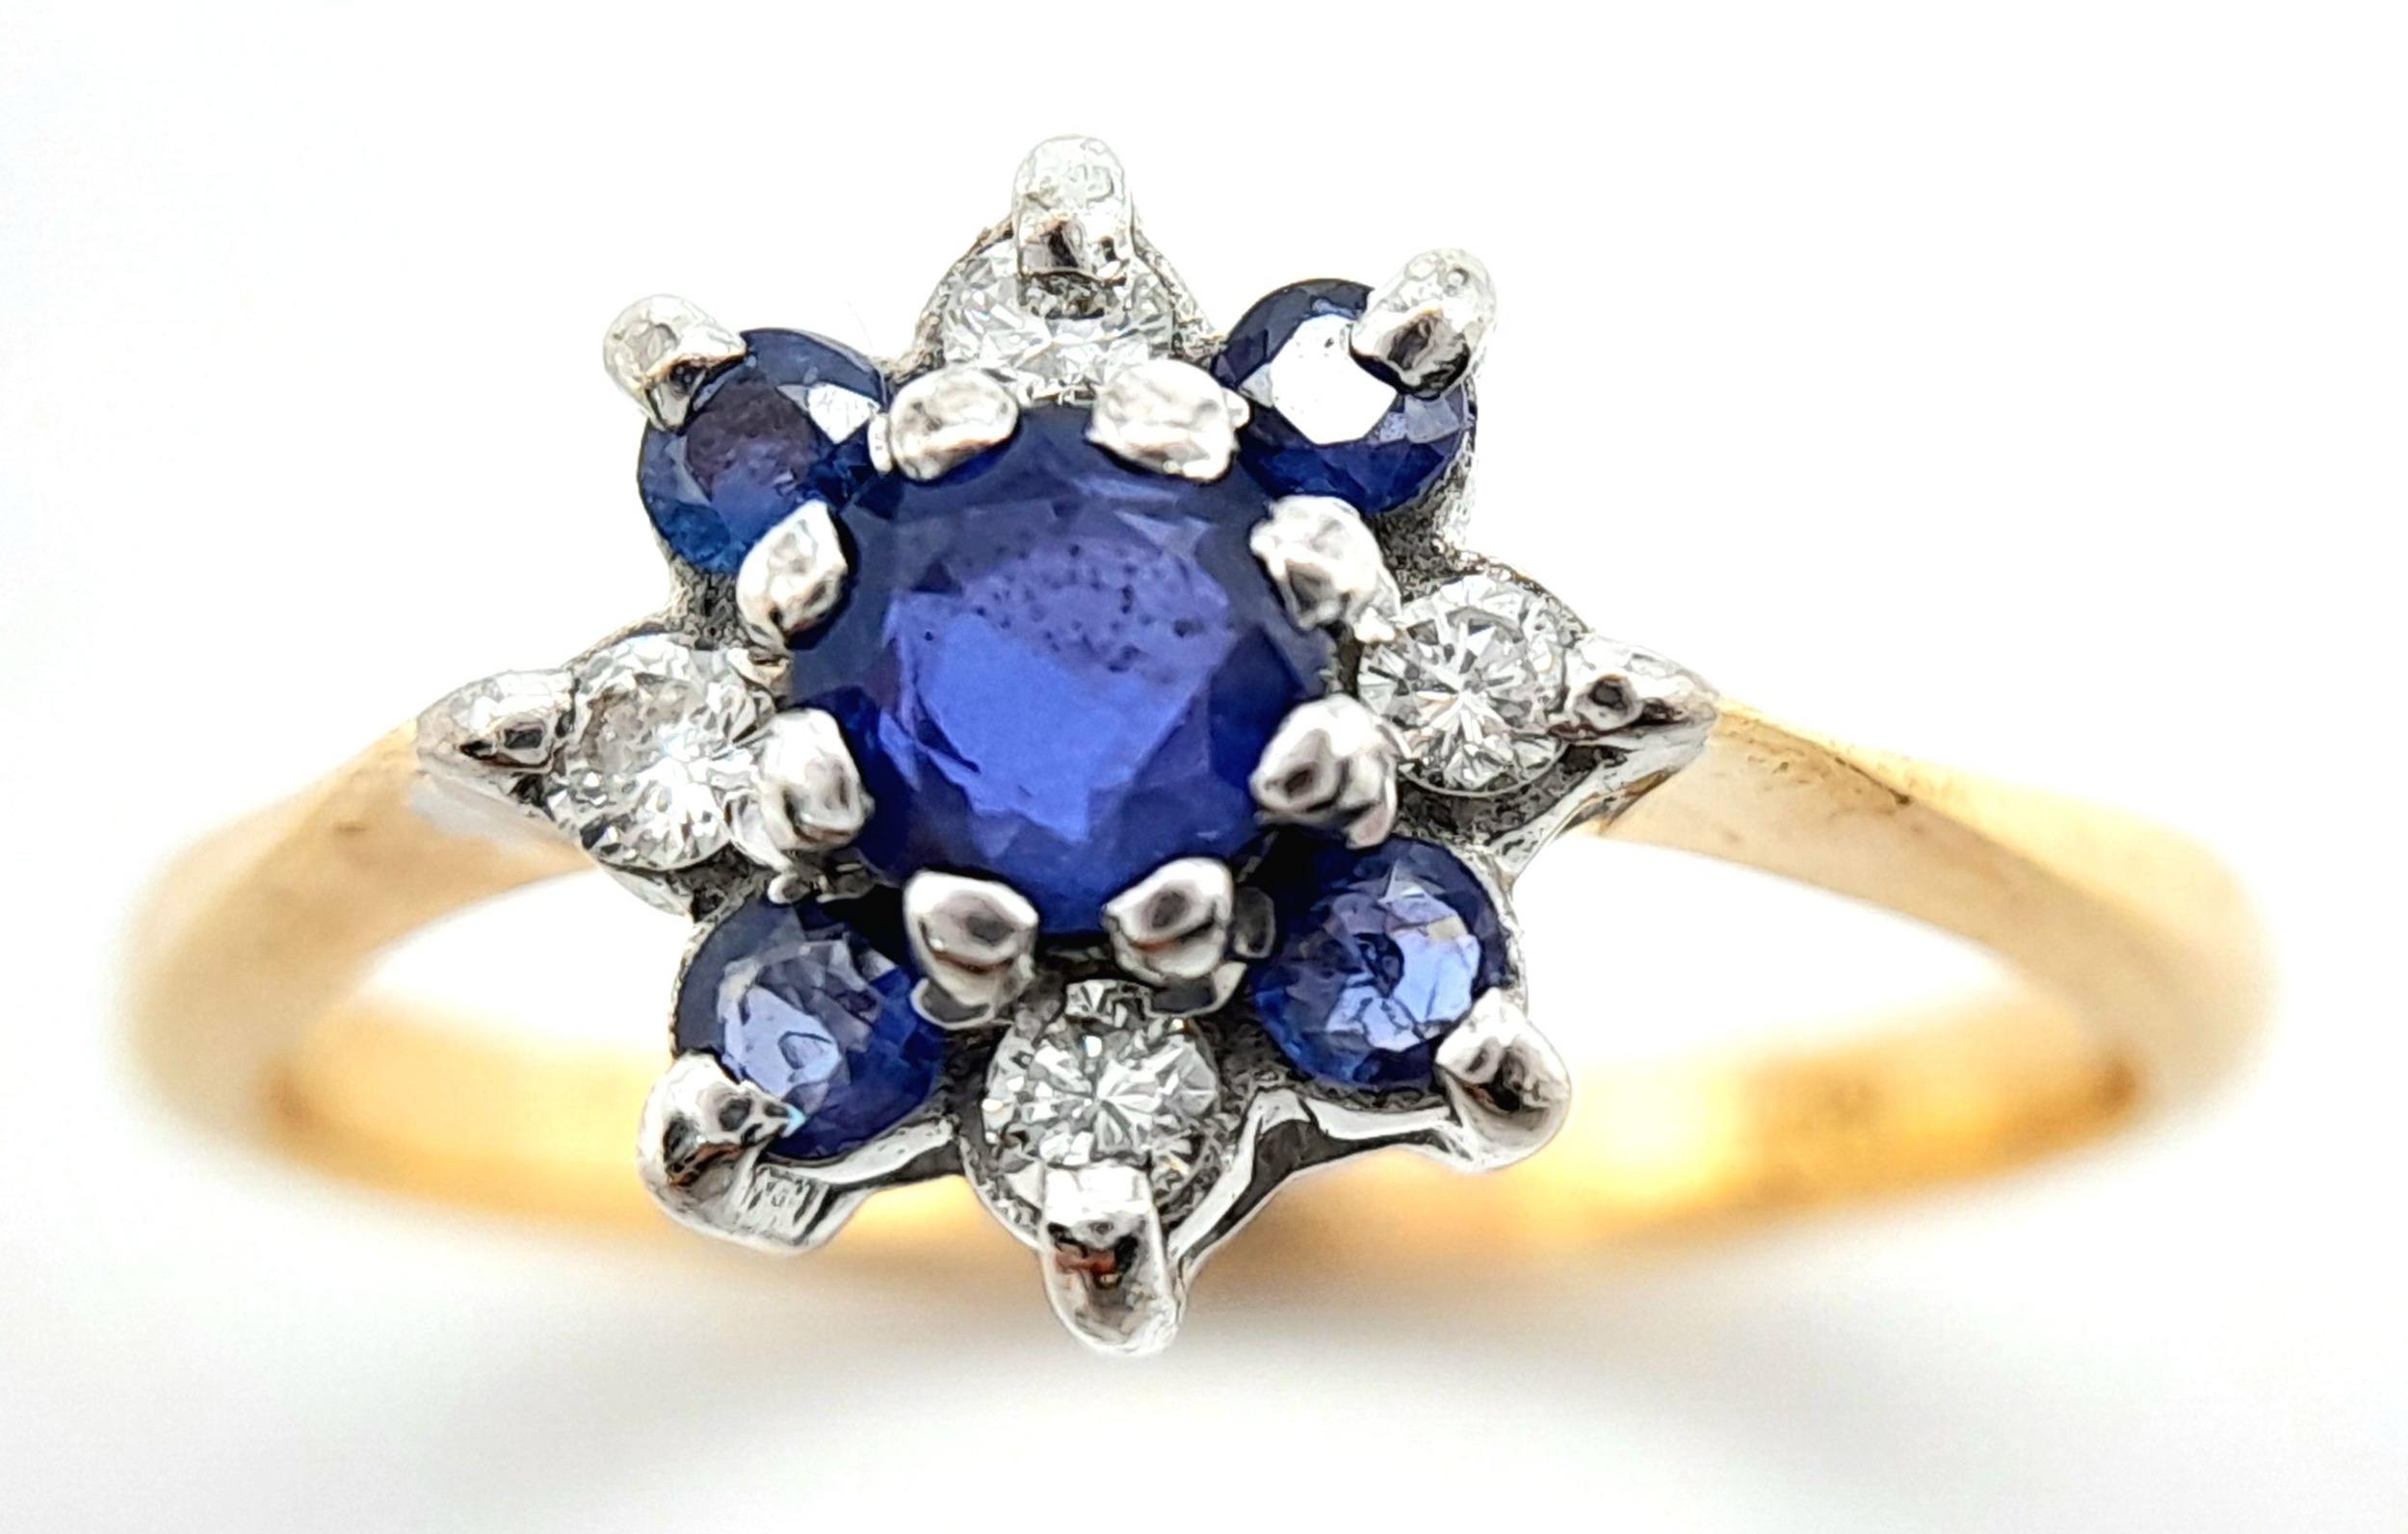 AN 18K YELLOW GOLD DIAMOND AND SAPPHIRE CLUSTER RING. 3.3G. SIZE L - Image 6 of 6